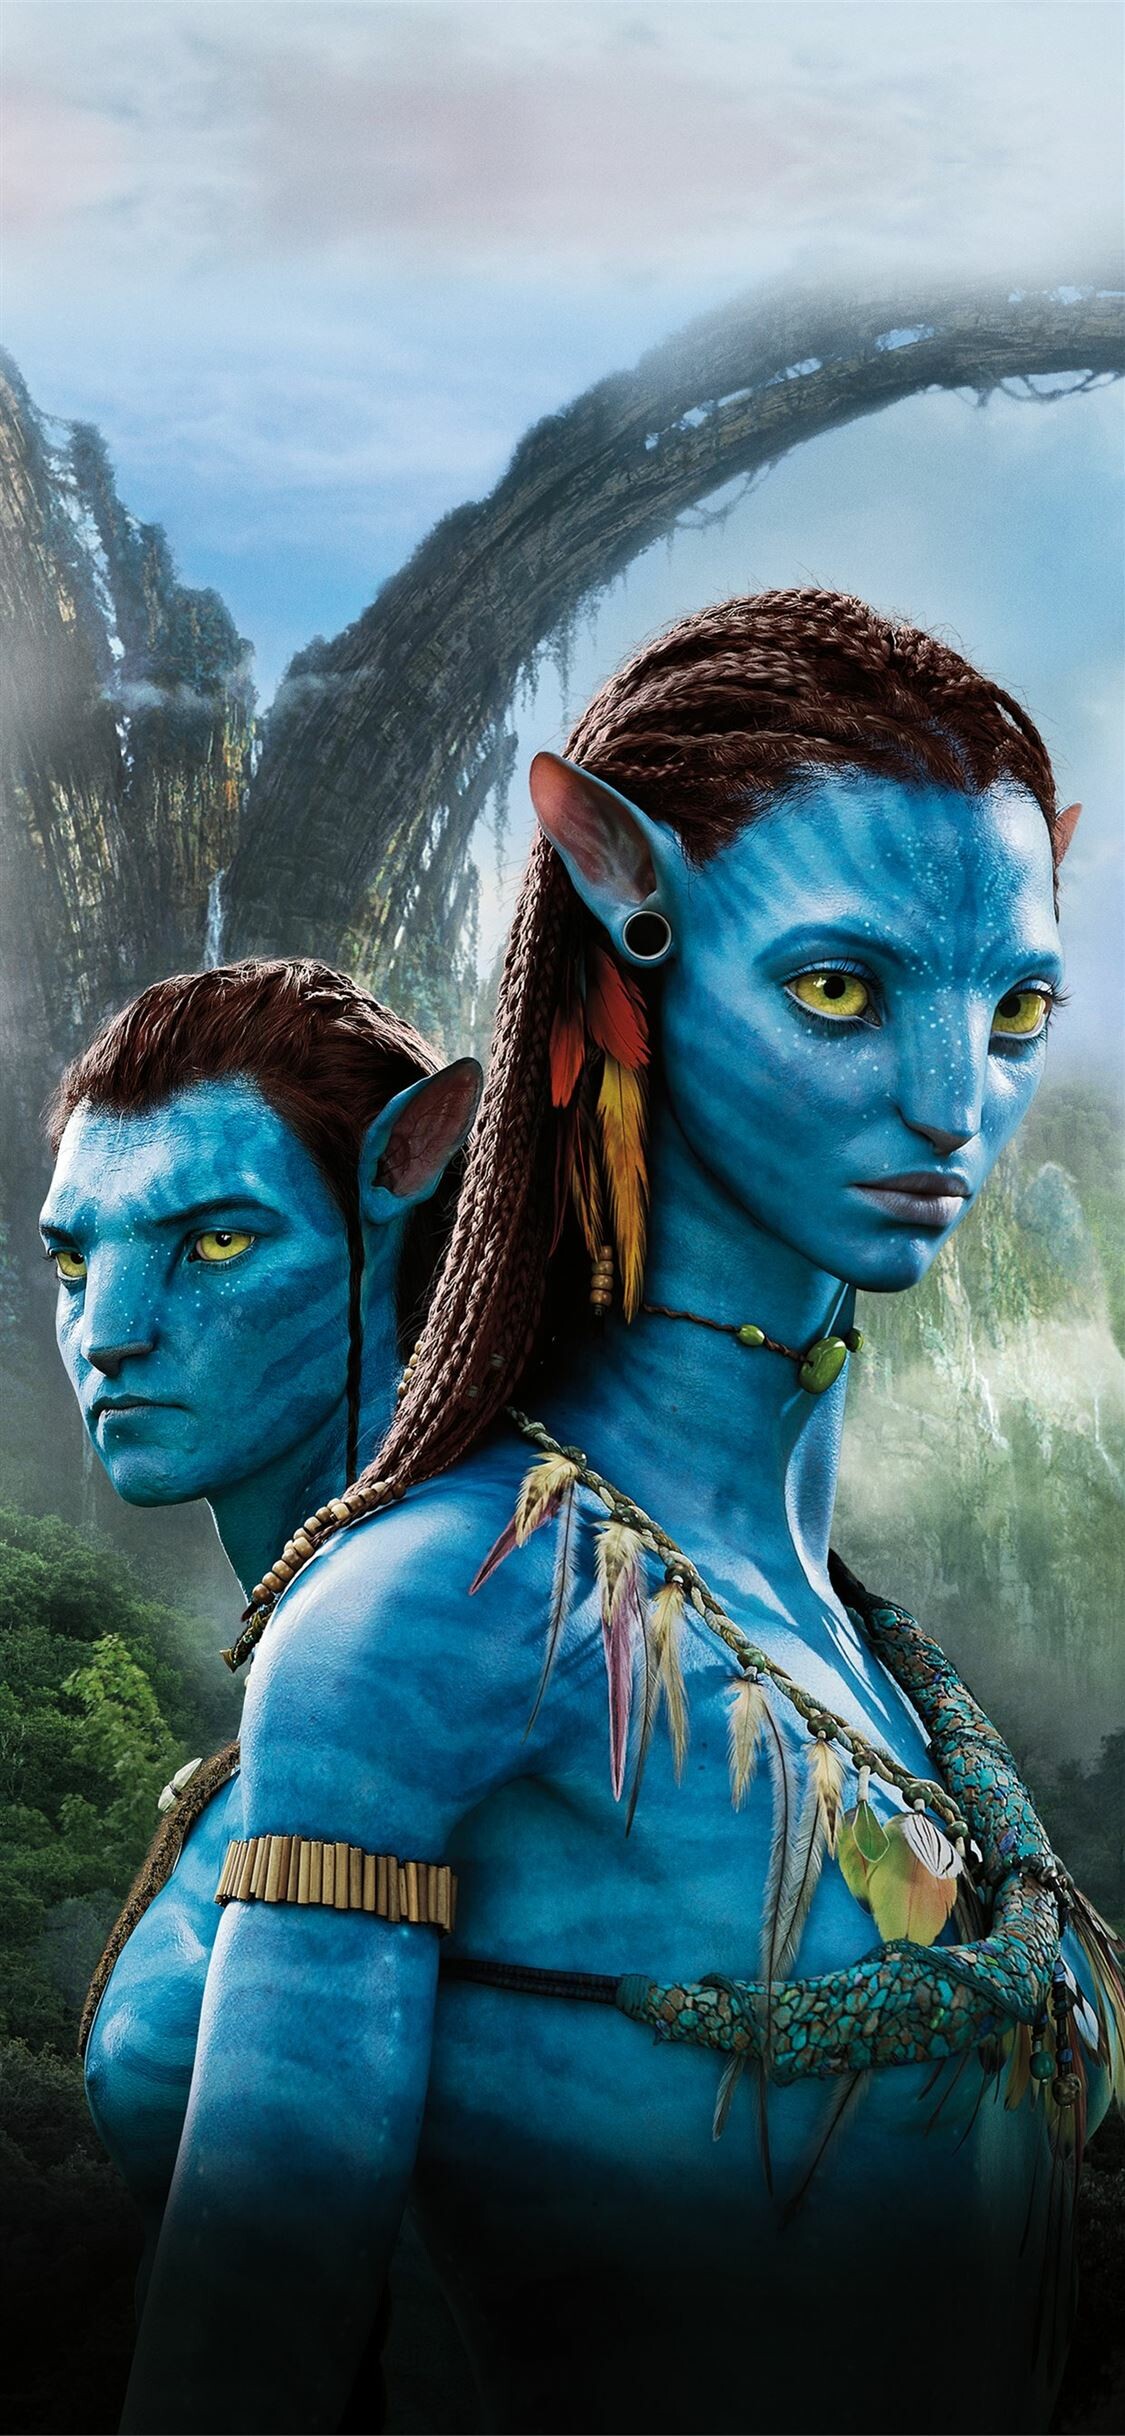 Avatar: For the love story between characters Jake and Neytiri, Cameron applied a star-crossed love theme, which he said was in the tradition of Romeo and Juliet. 1130x2440 HD Wallpaper.